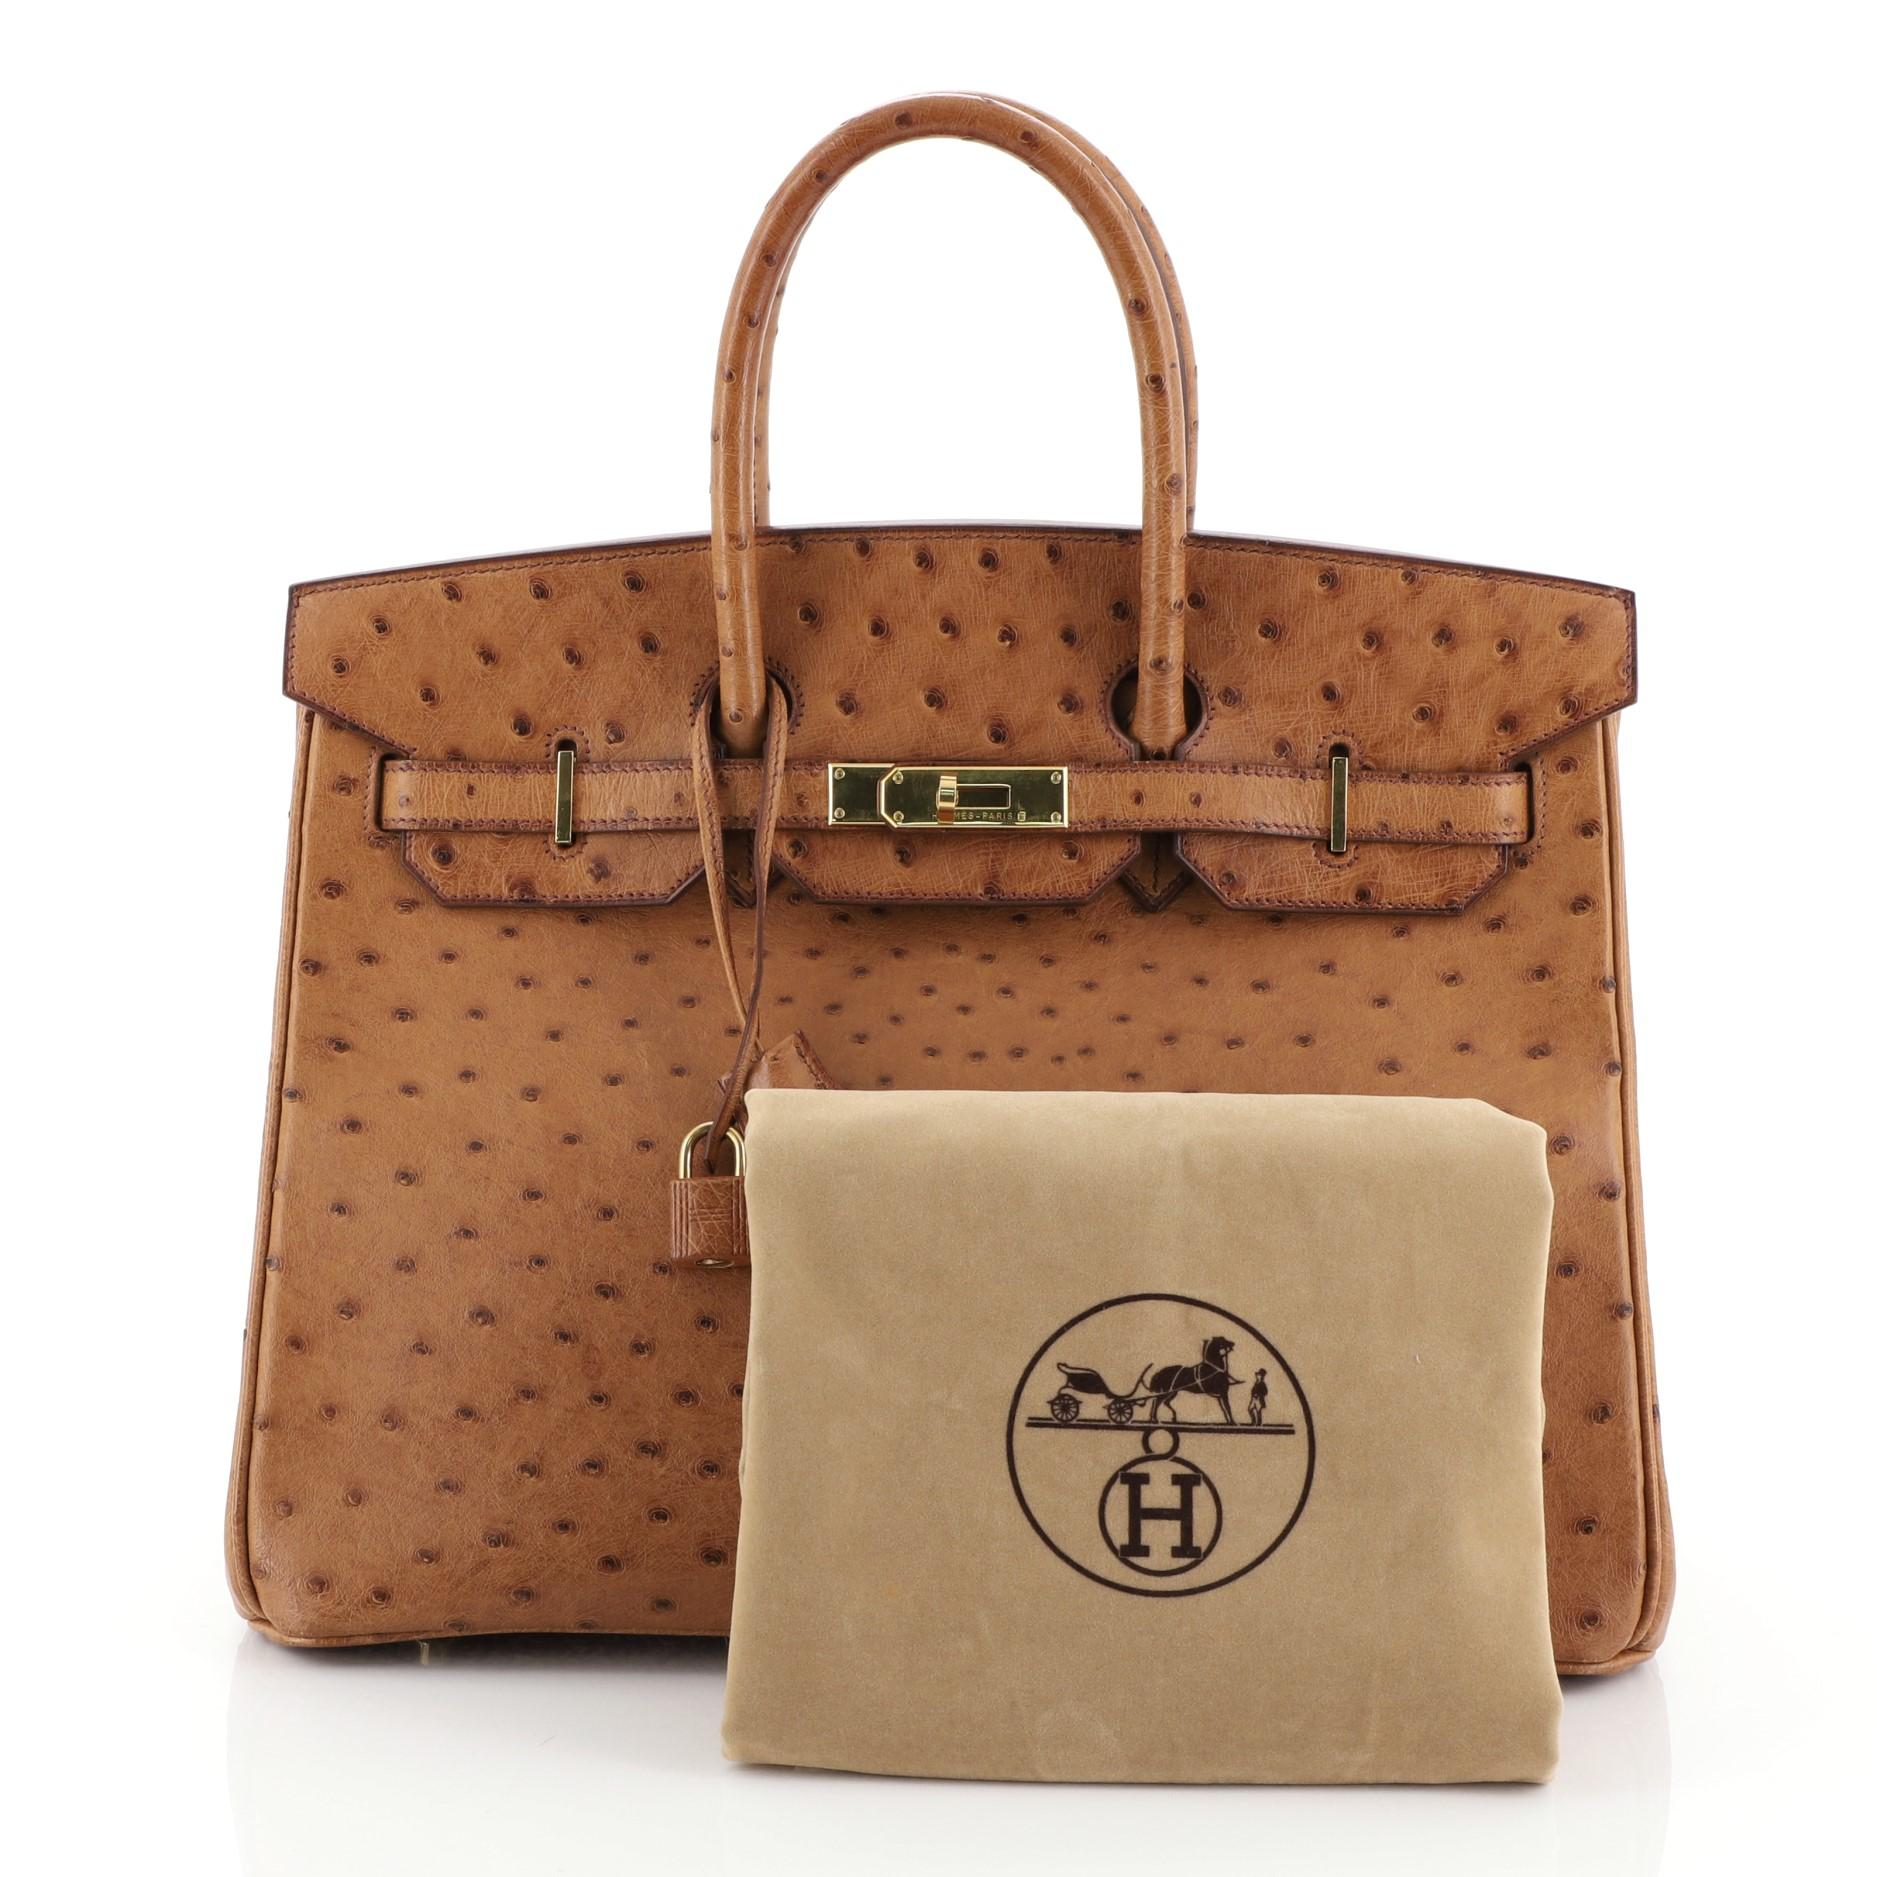 This Hermes Birkin Handbag Cognac Ostrich with Gold Hardware 35, crafted in genuine Cognac brown Ostrich, features dual rolled top handles, frontal flap, and gold hardware. Its turn-lock closure opens to a Cognac brown Chevre leather interior with